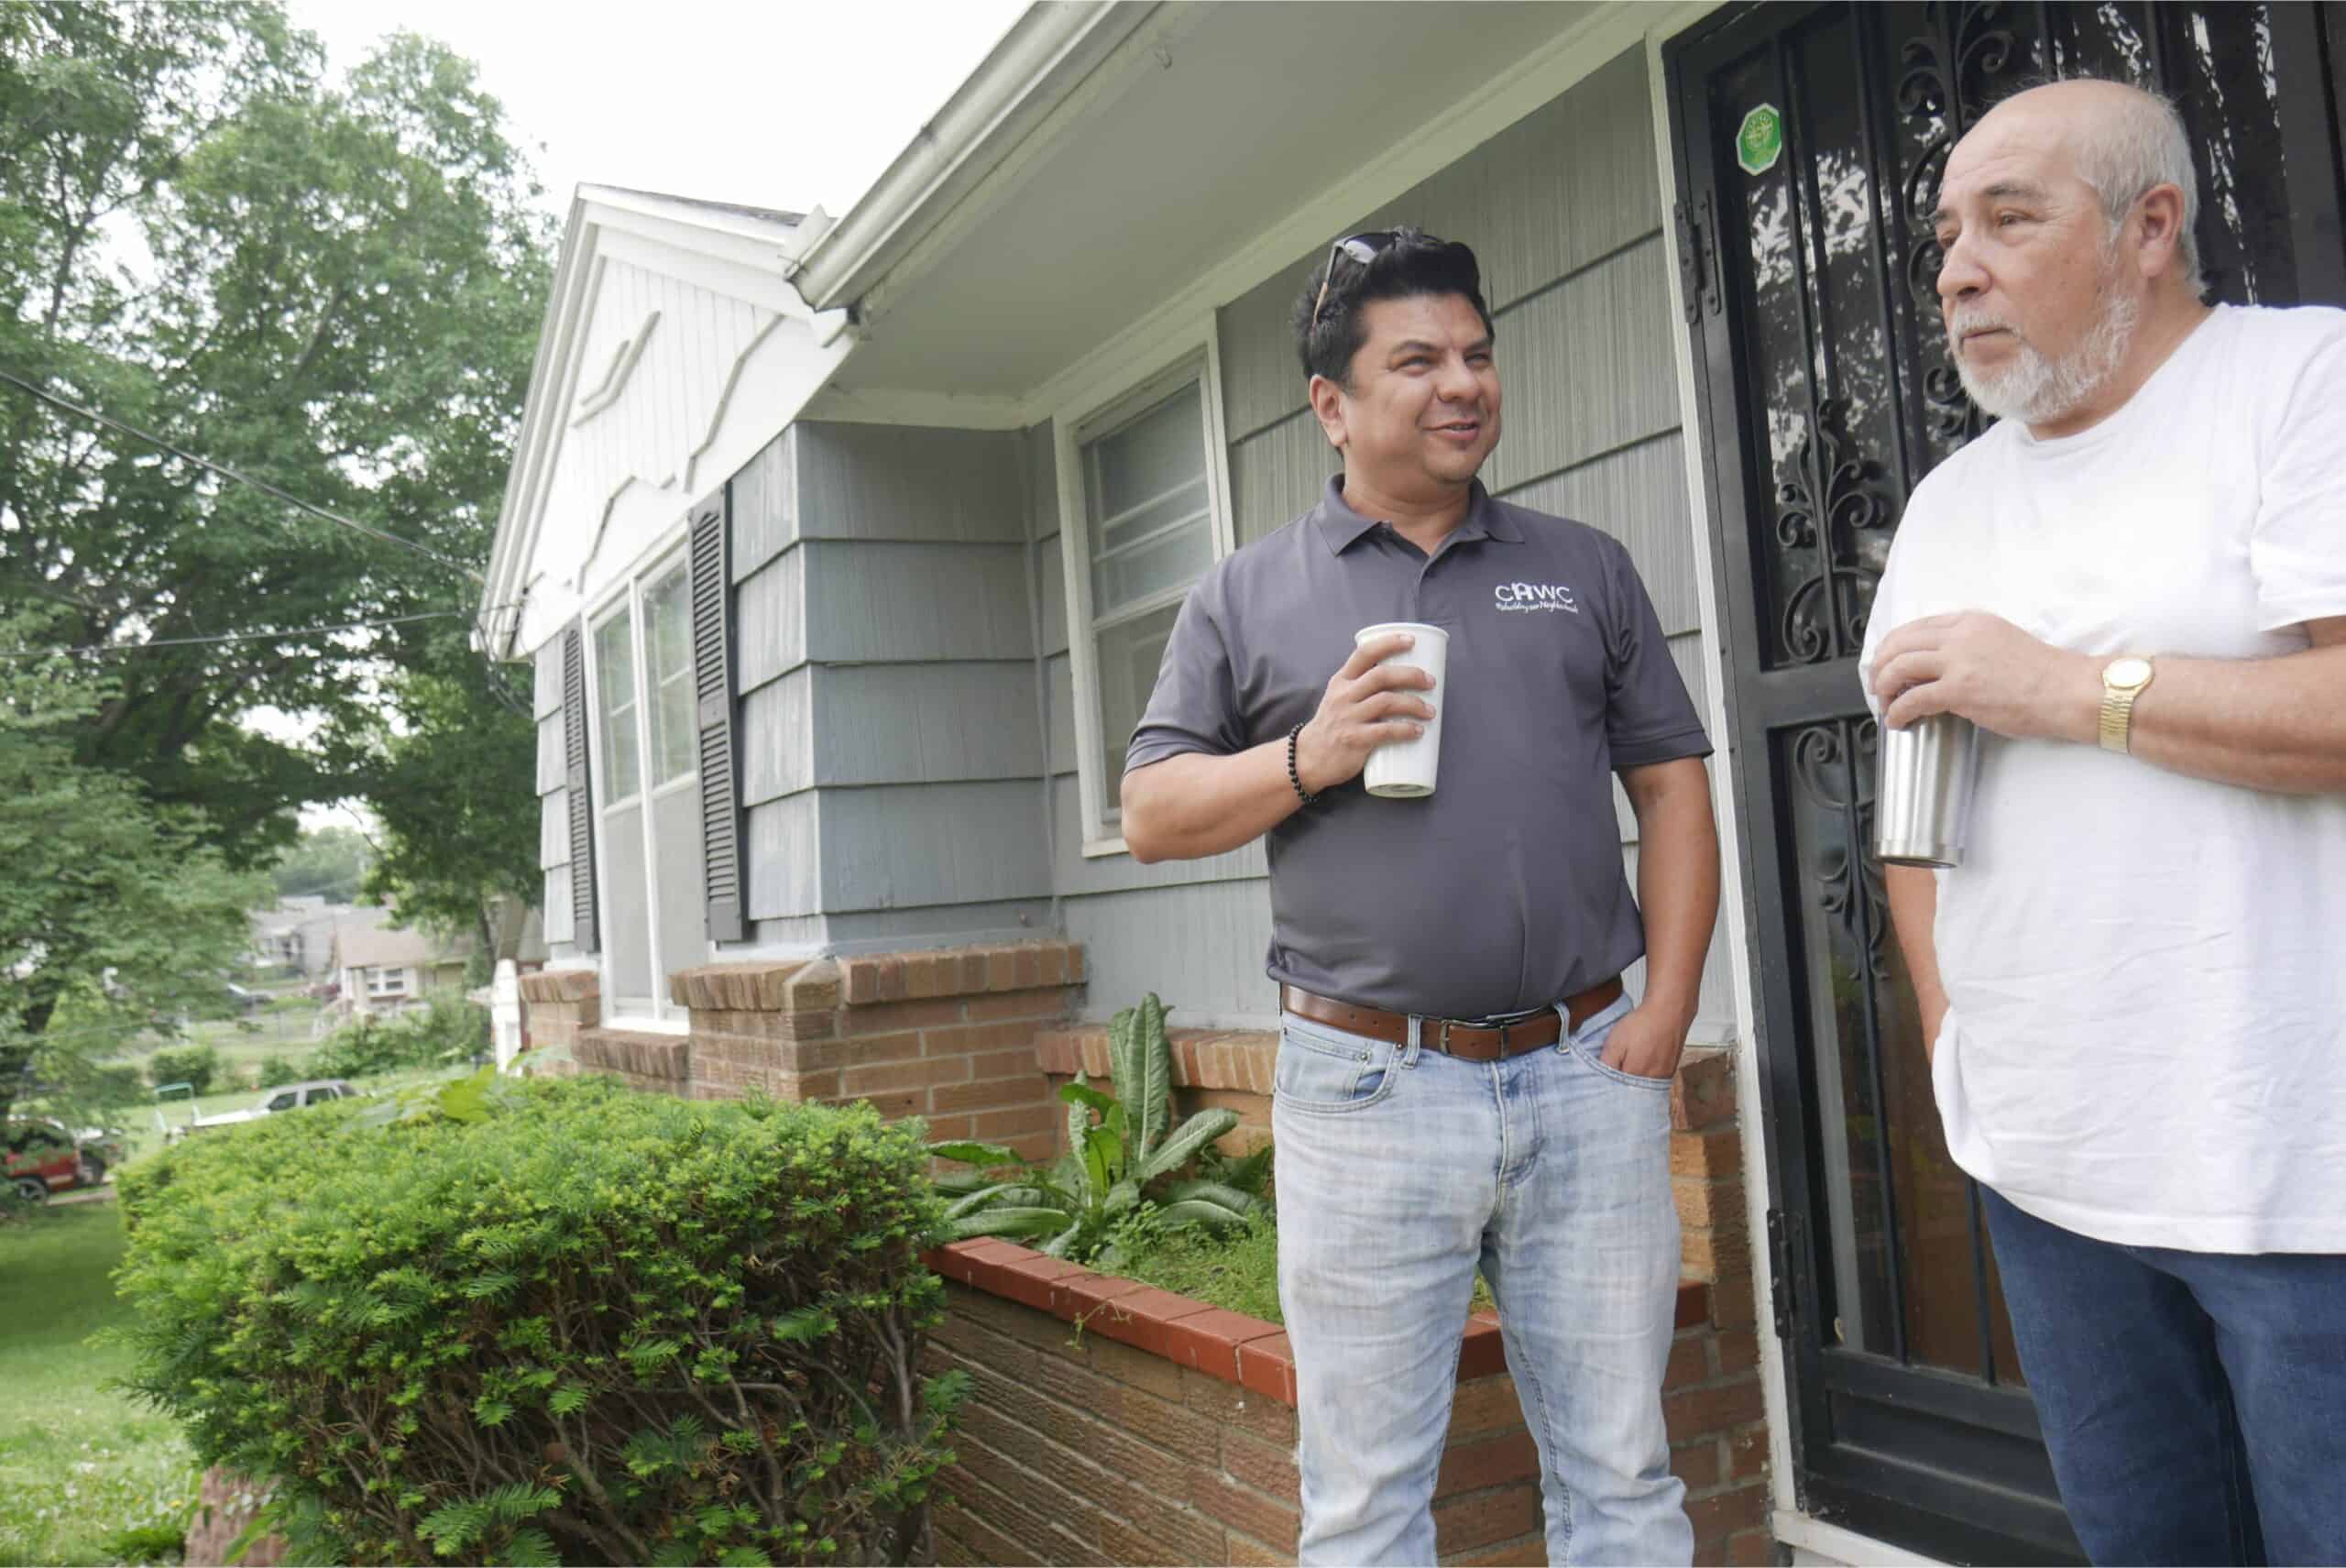 Lisandro, a housing counselor at CHWC, and David, a KCK homeowner, stand on David's front porch talking and drinking coffee. 